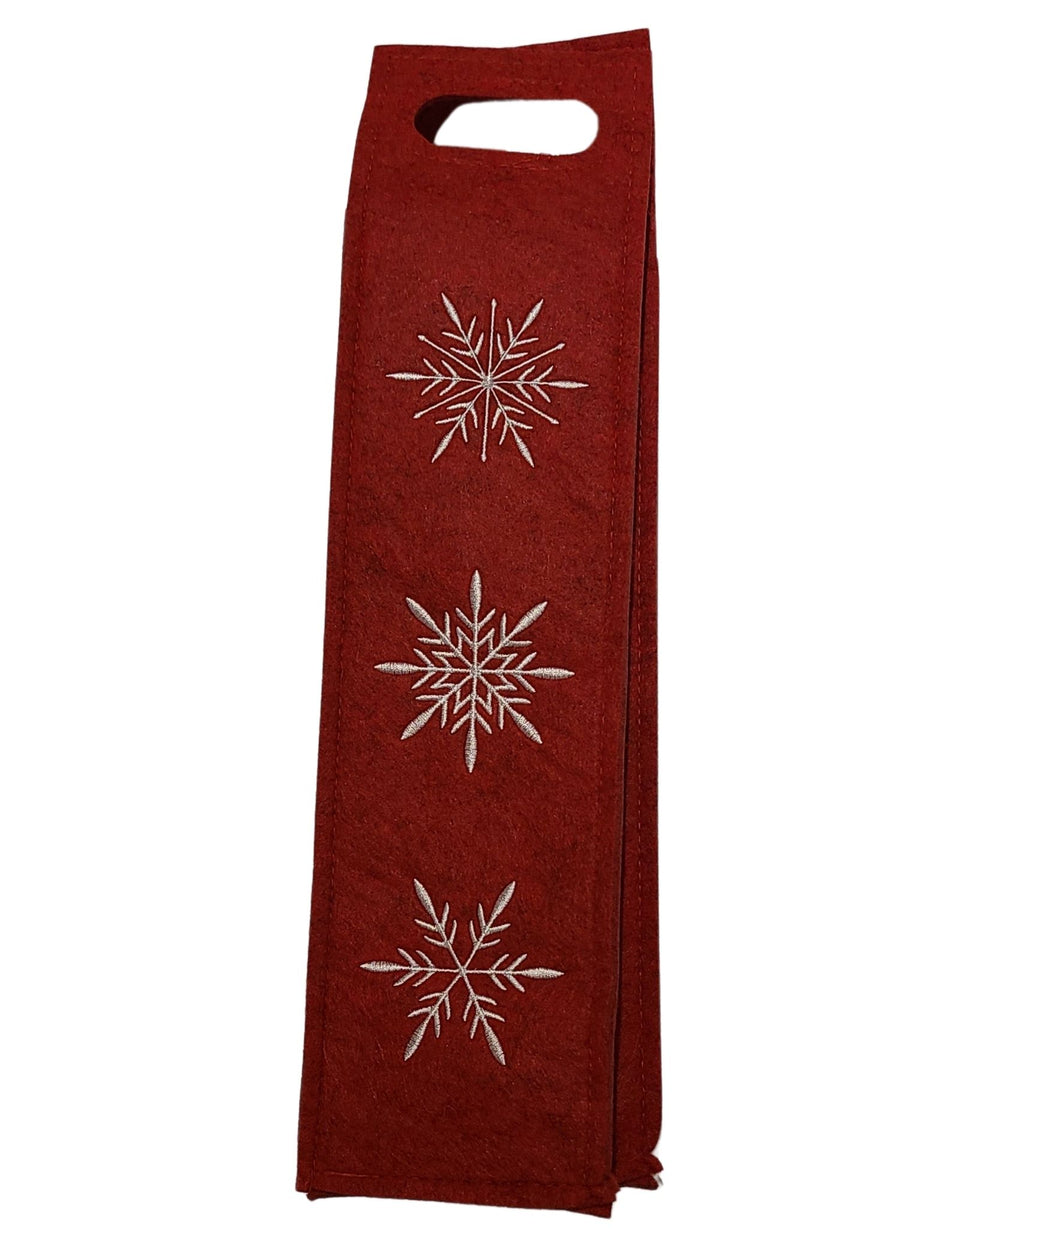 Bring wine and holiday cheer anywhere with this whymsical White Snowflakes Wine Bag. Crafted out of polyester felt, this red wine bag features embroidered white snowflakes— a fun way to take your favourite vintage to-go for the holidays.  Makes a great hostess gift.  Size:  16